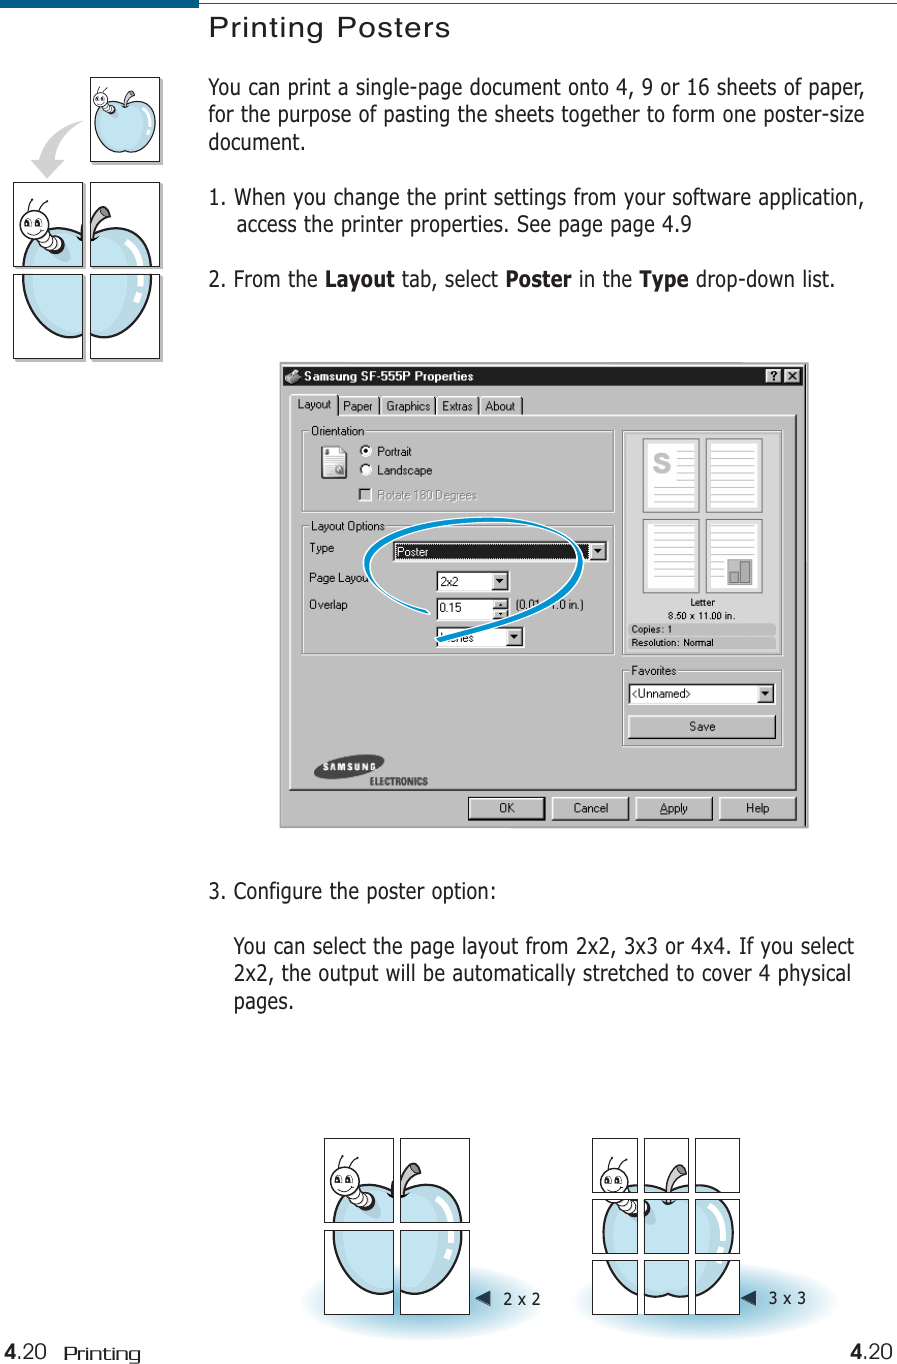 4.20 Printing 4.20Printing PostersYou can print a single-page document onto 4, 9 or 16 sheets of paper,for the purpose of pasting the sheets together to form one poster-sizedocument.1. When you change the print settings from your software application,access the printer properties. See page page 4.92. From the Layout tab, select Poster in the Type drop-down list.➛➛☎☎☎☎➛➛☎☎☎☎2 x 2 ➛➛☎☎☎☎➛➛☎☎☎☎3 x 33. Configure the poster option:You can select the page layout from 2x2, 3x3 or 4x4. If you select2x2, the output will be automatically stretched to cover 4 physicalpages.